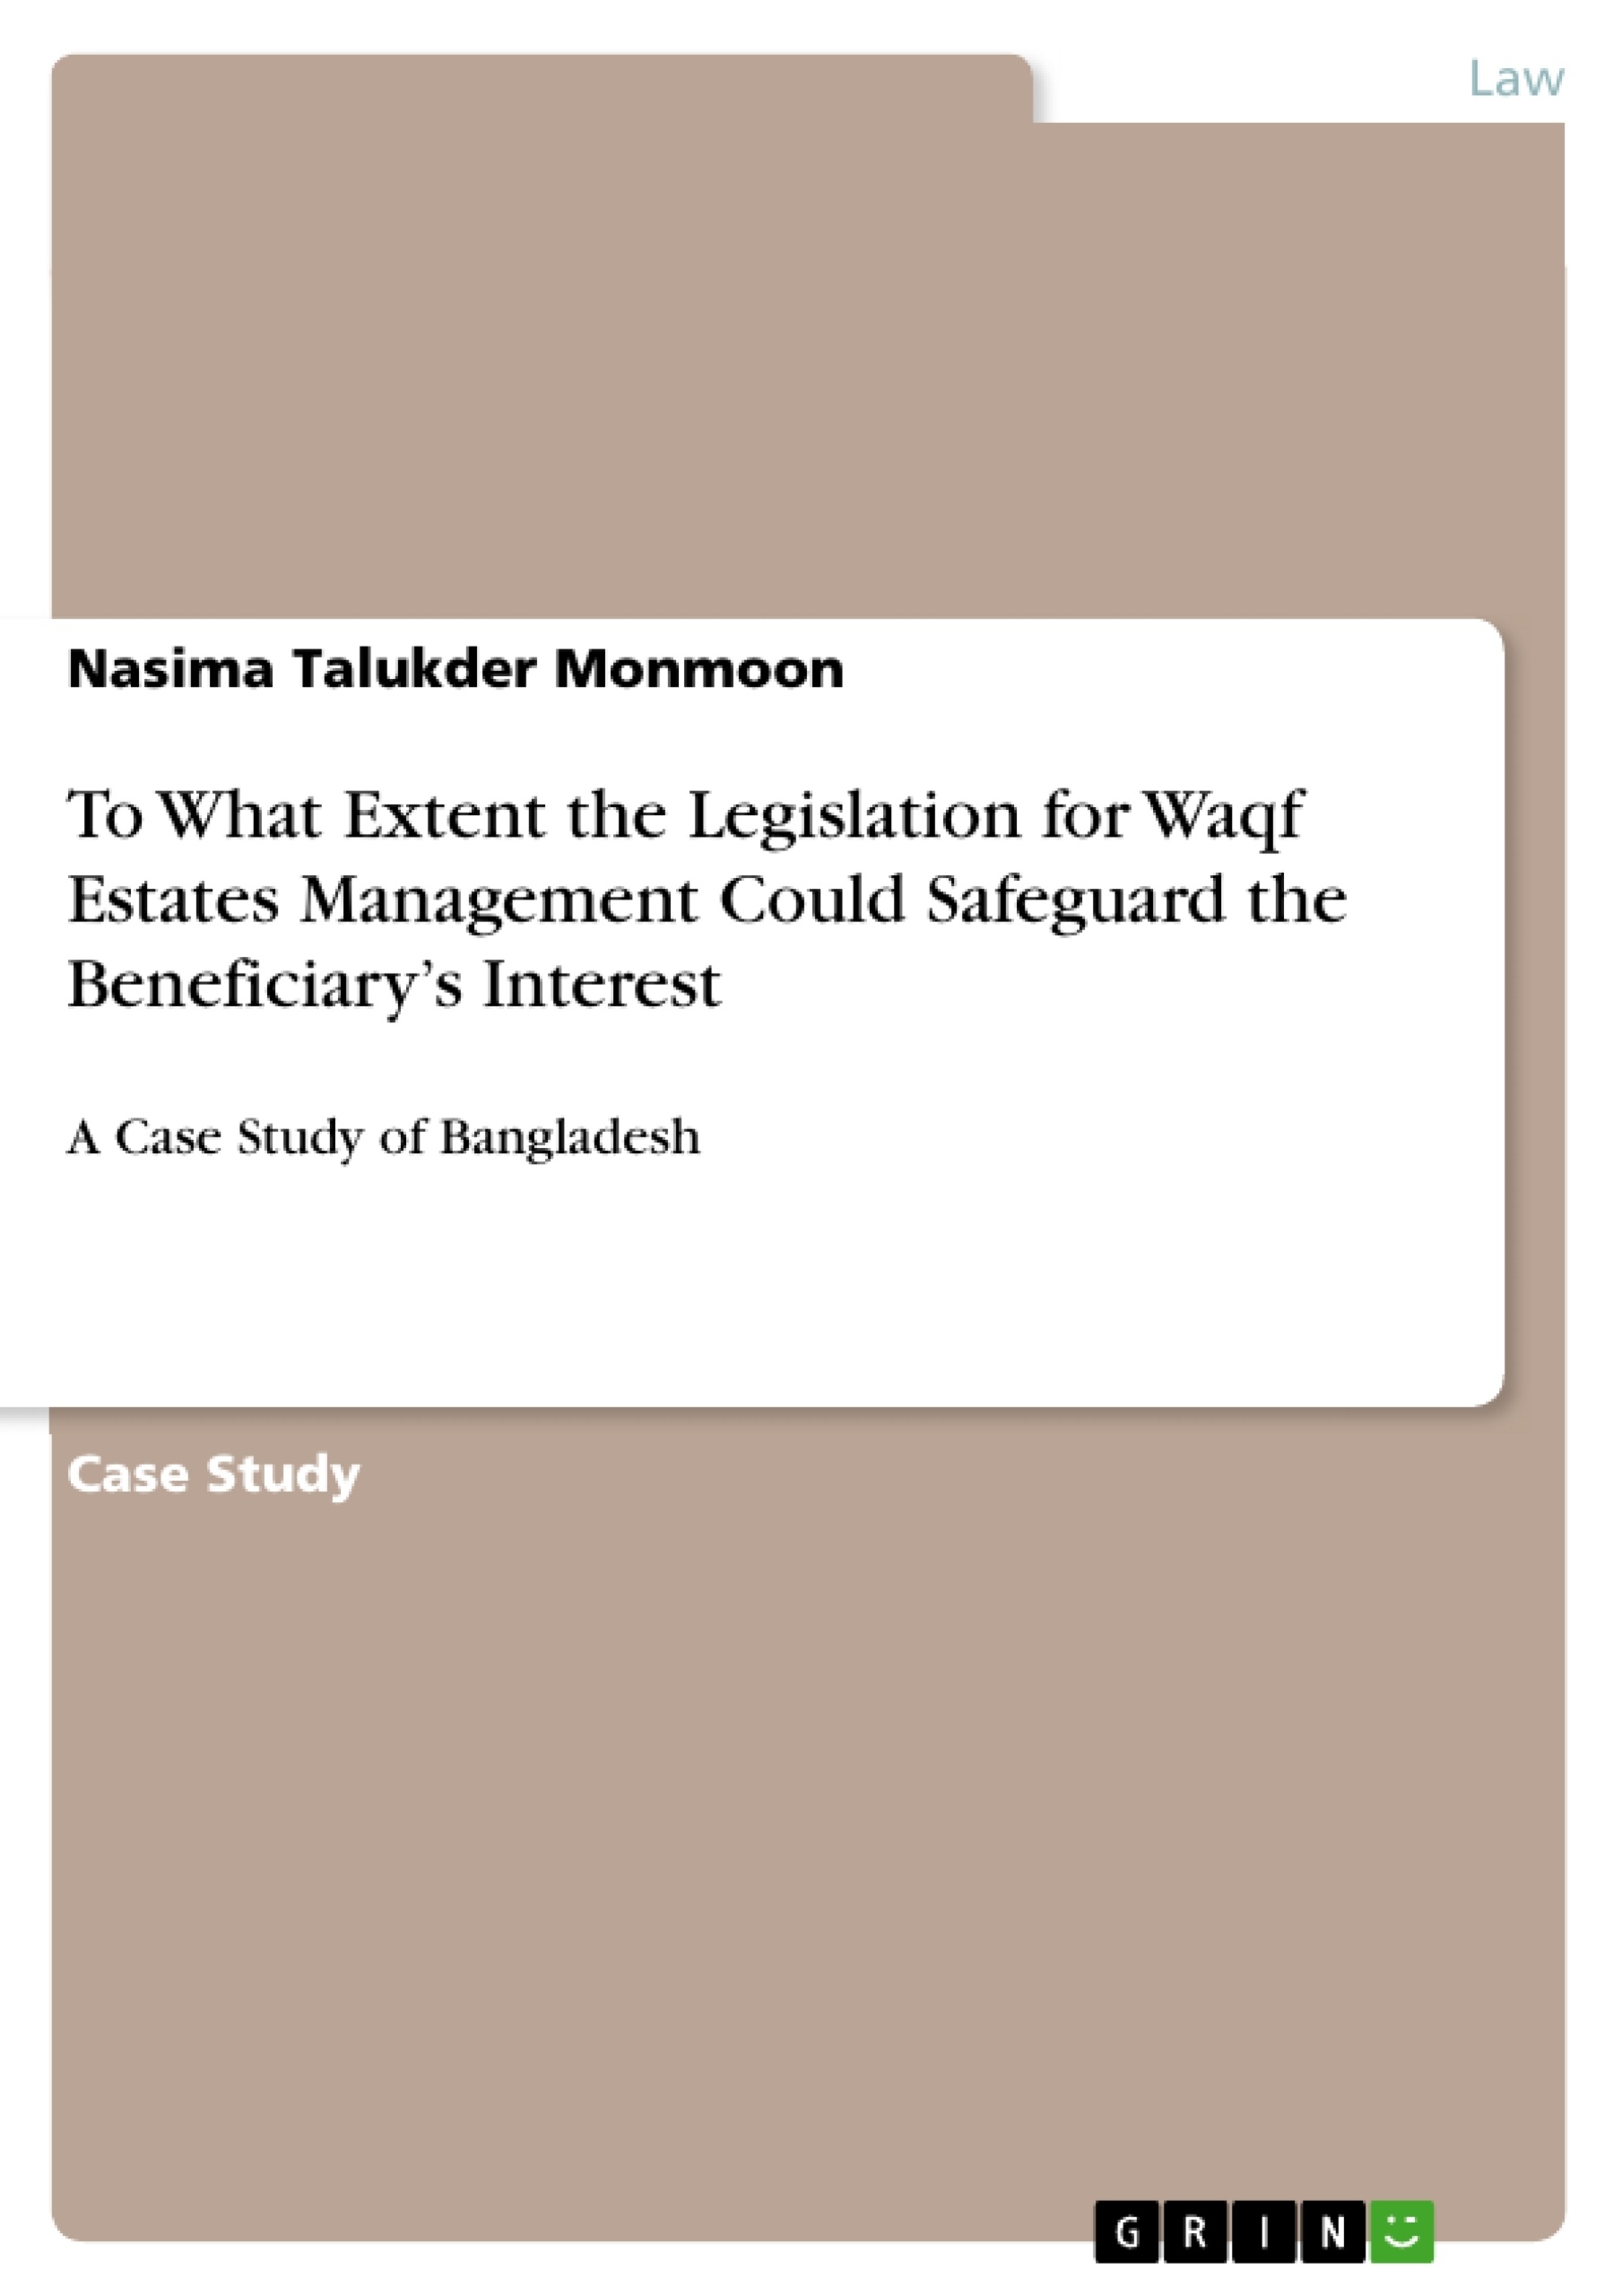 Titre: To What Extent the Legislation for Waqf Estates Management Could Safeguard the Beneficiary’s Interest